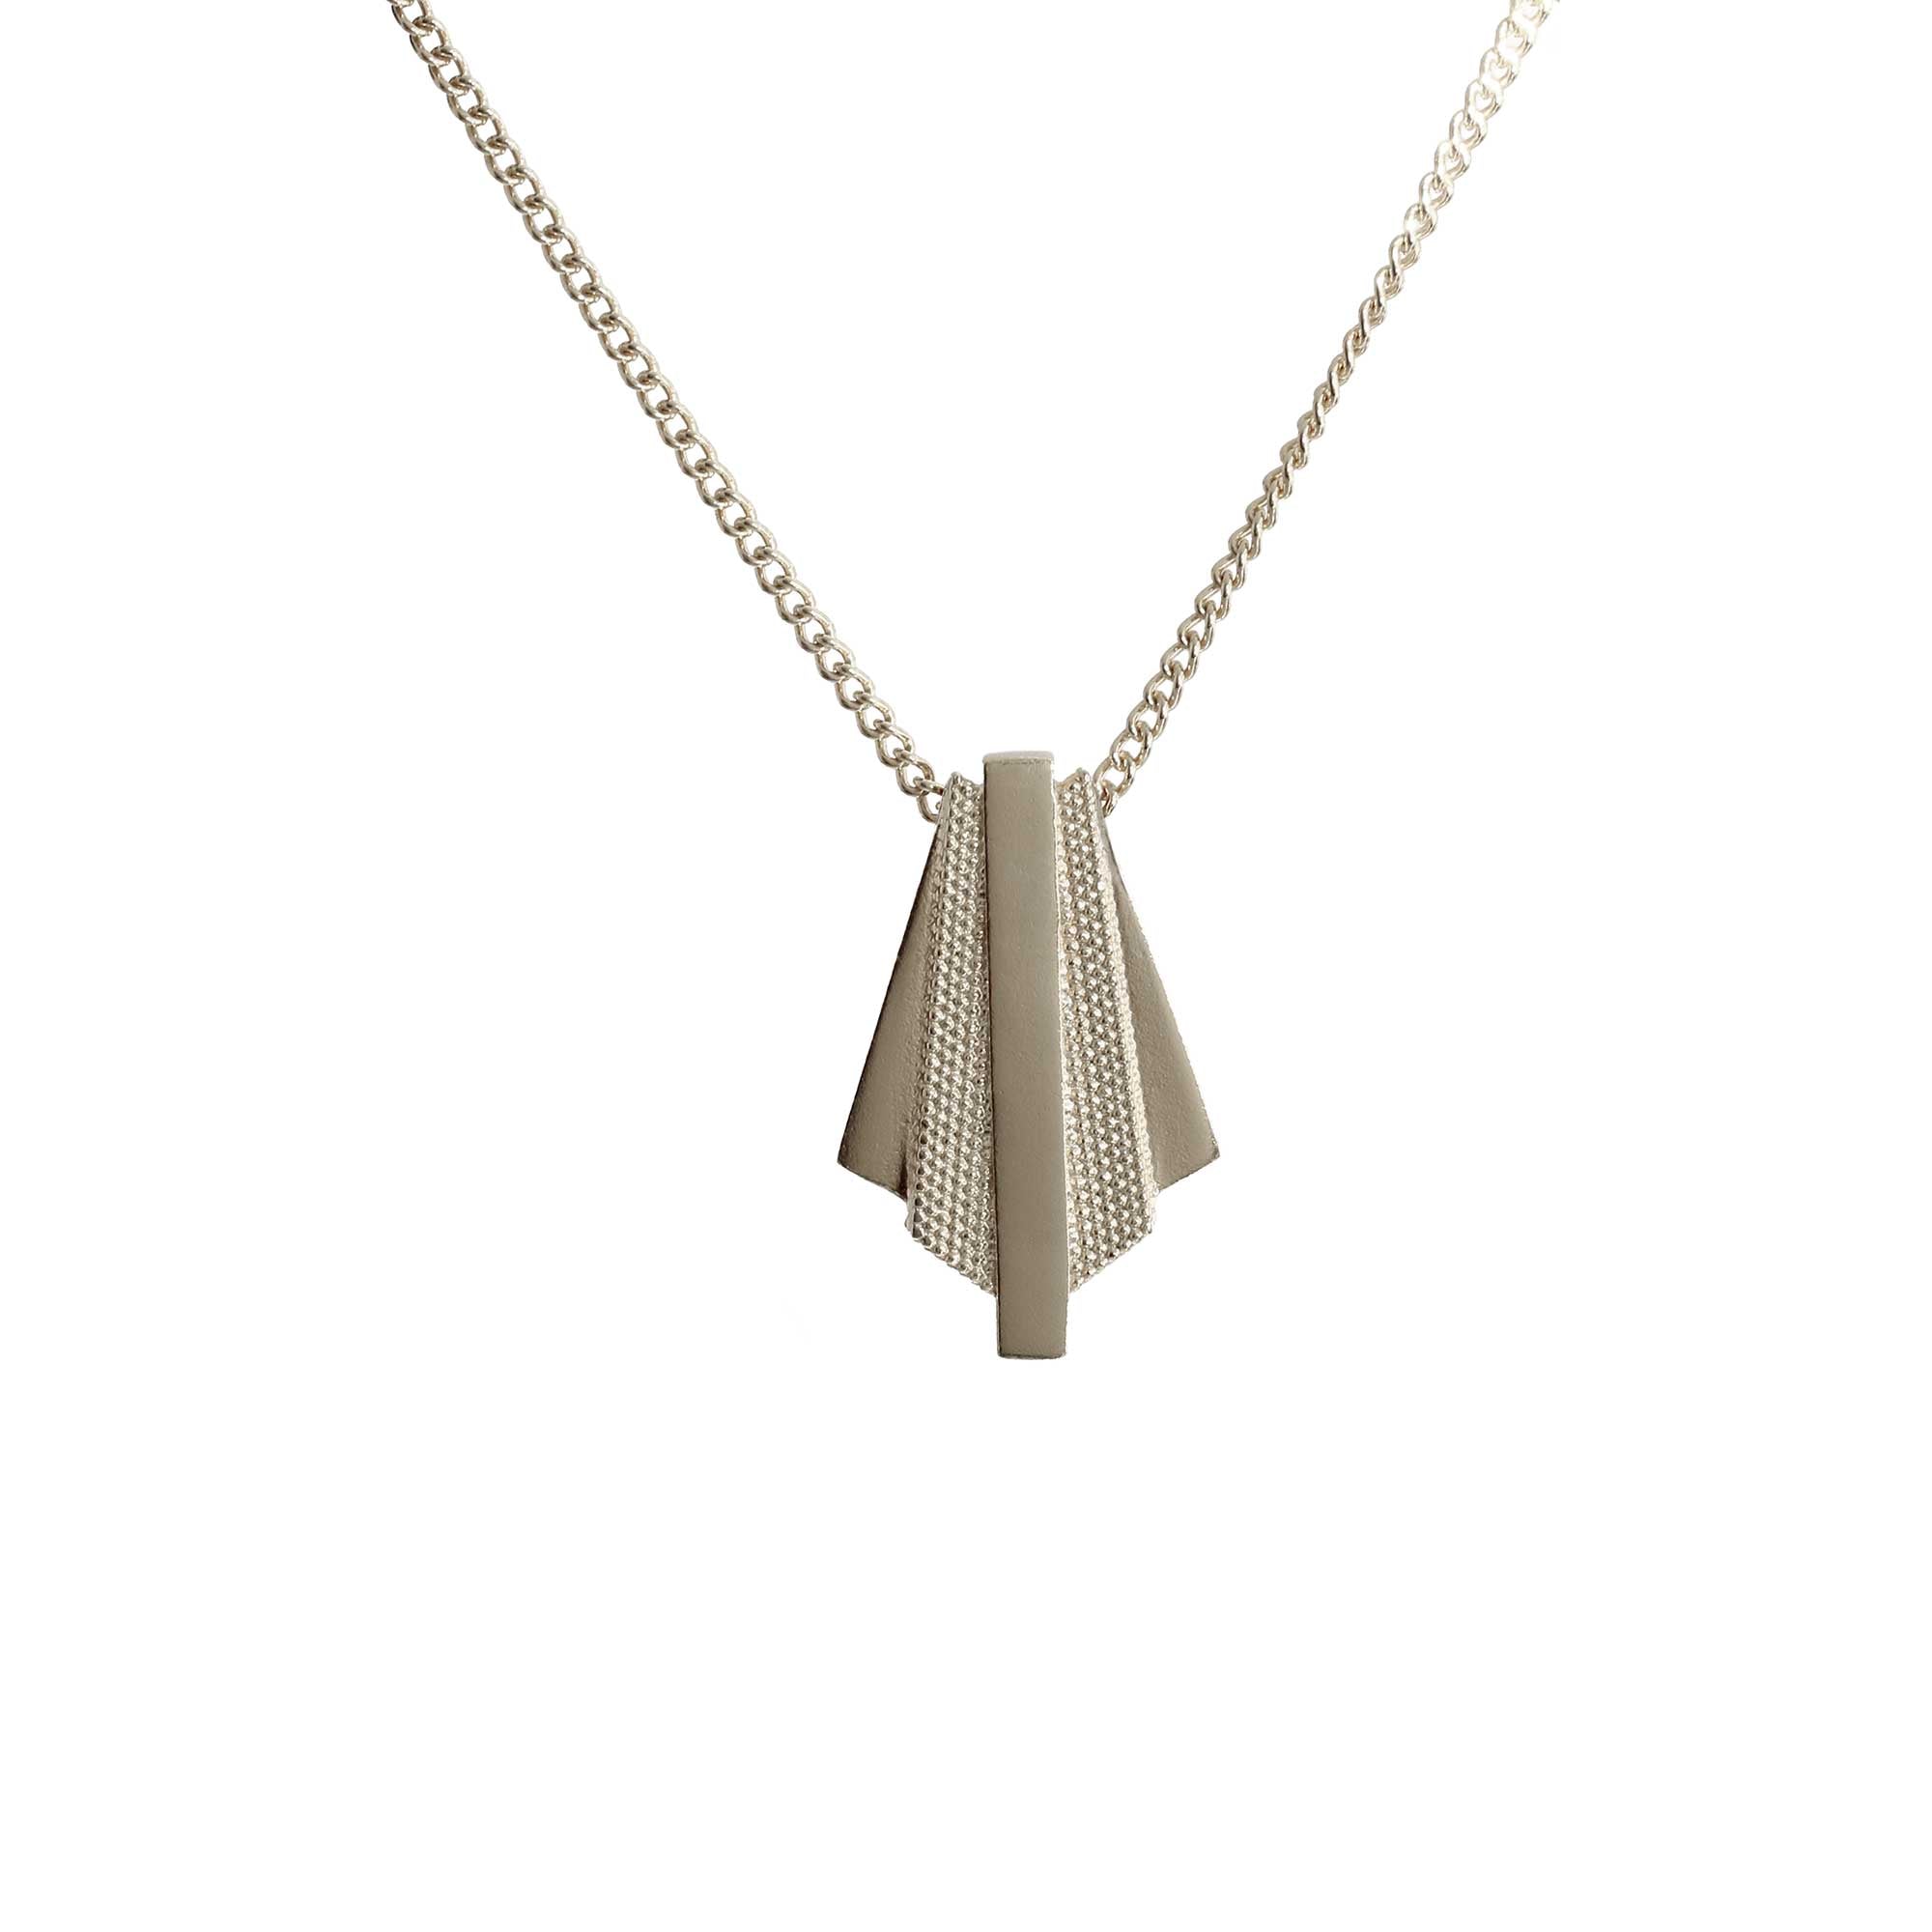 The contrasting rough and smooth textures of the Ruptus Slab geometric necklace in sterling silver